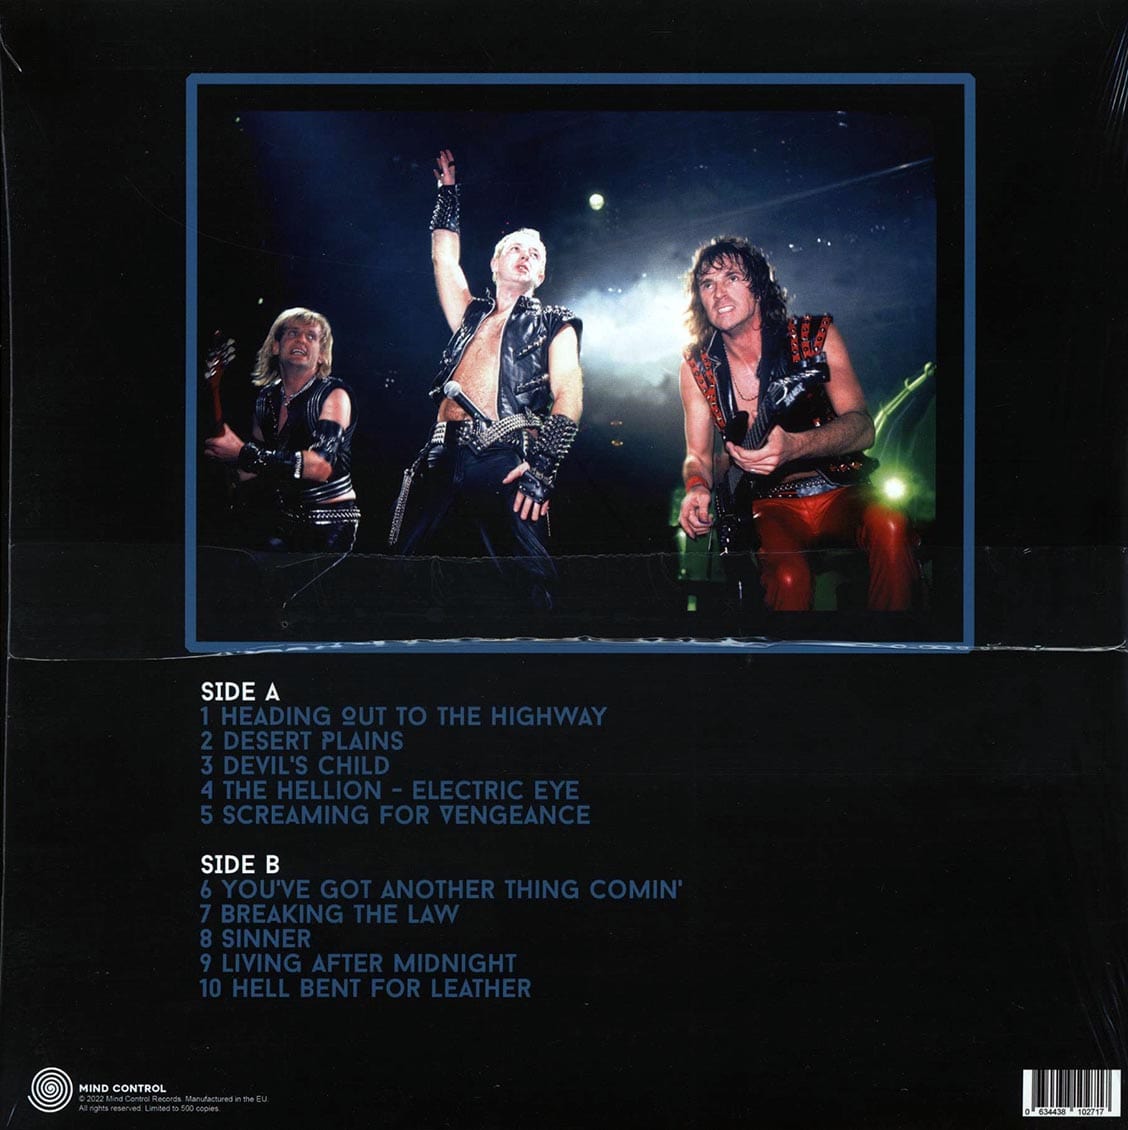 JUDAS PRIEST: Heading Out To Houston - Live at The Convention Center • Texas, June 8, 1983 FM Broadcast LP